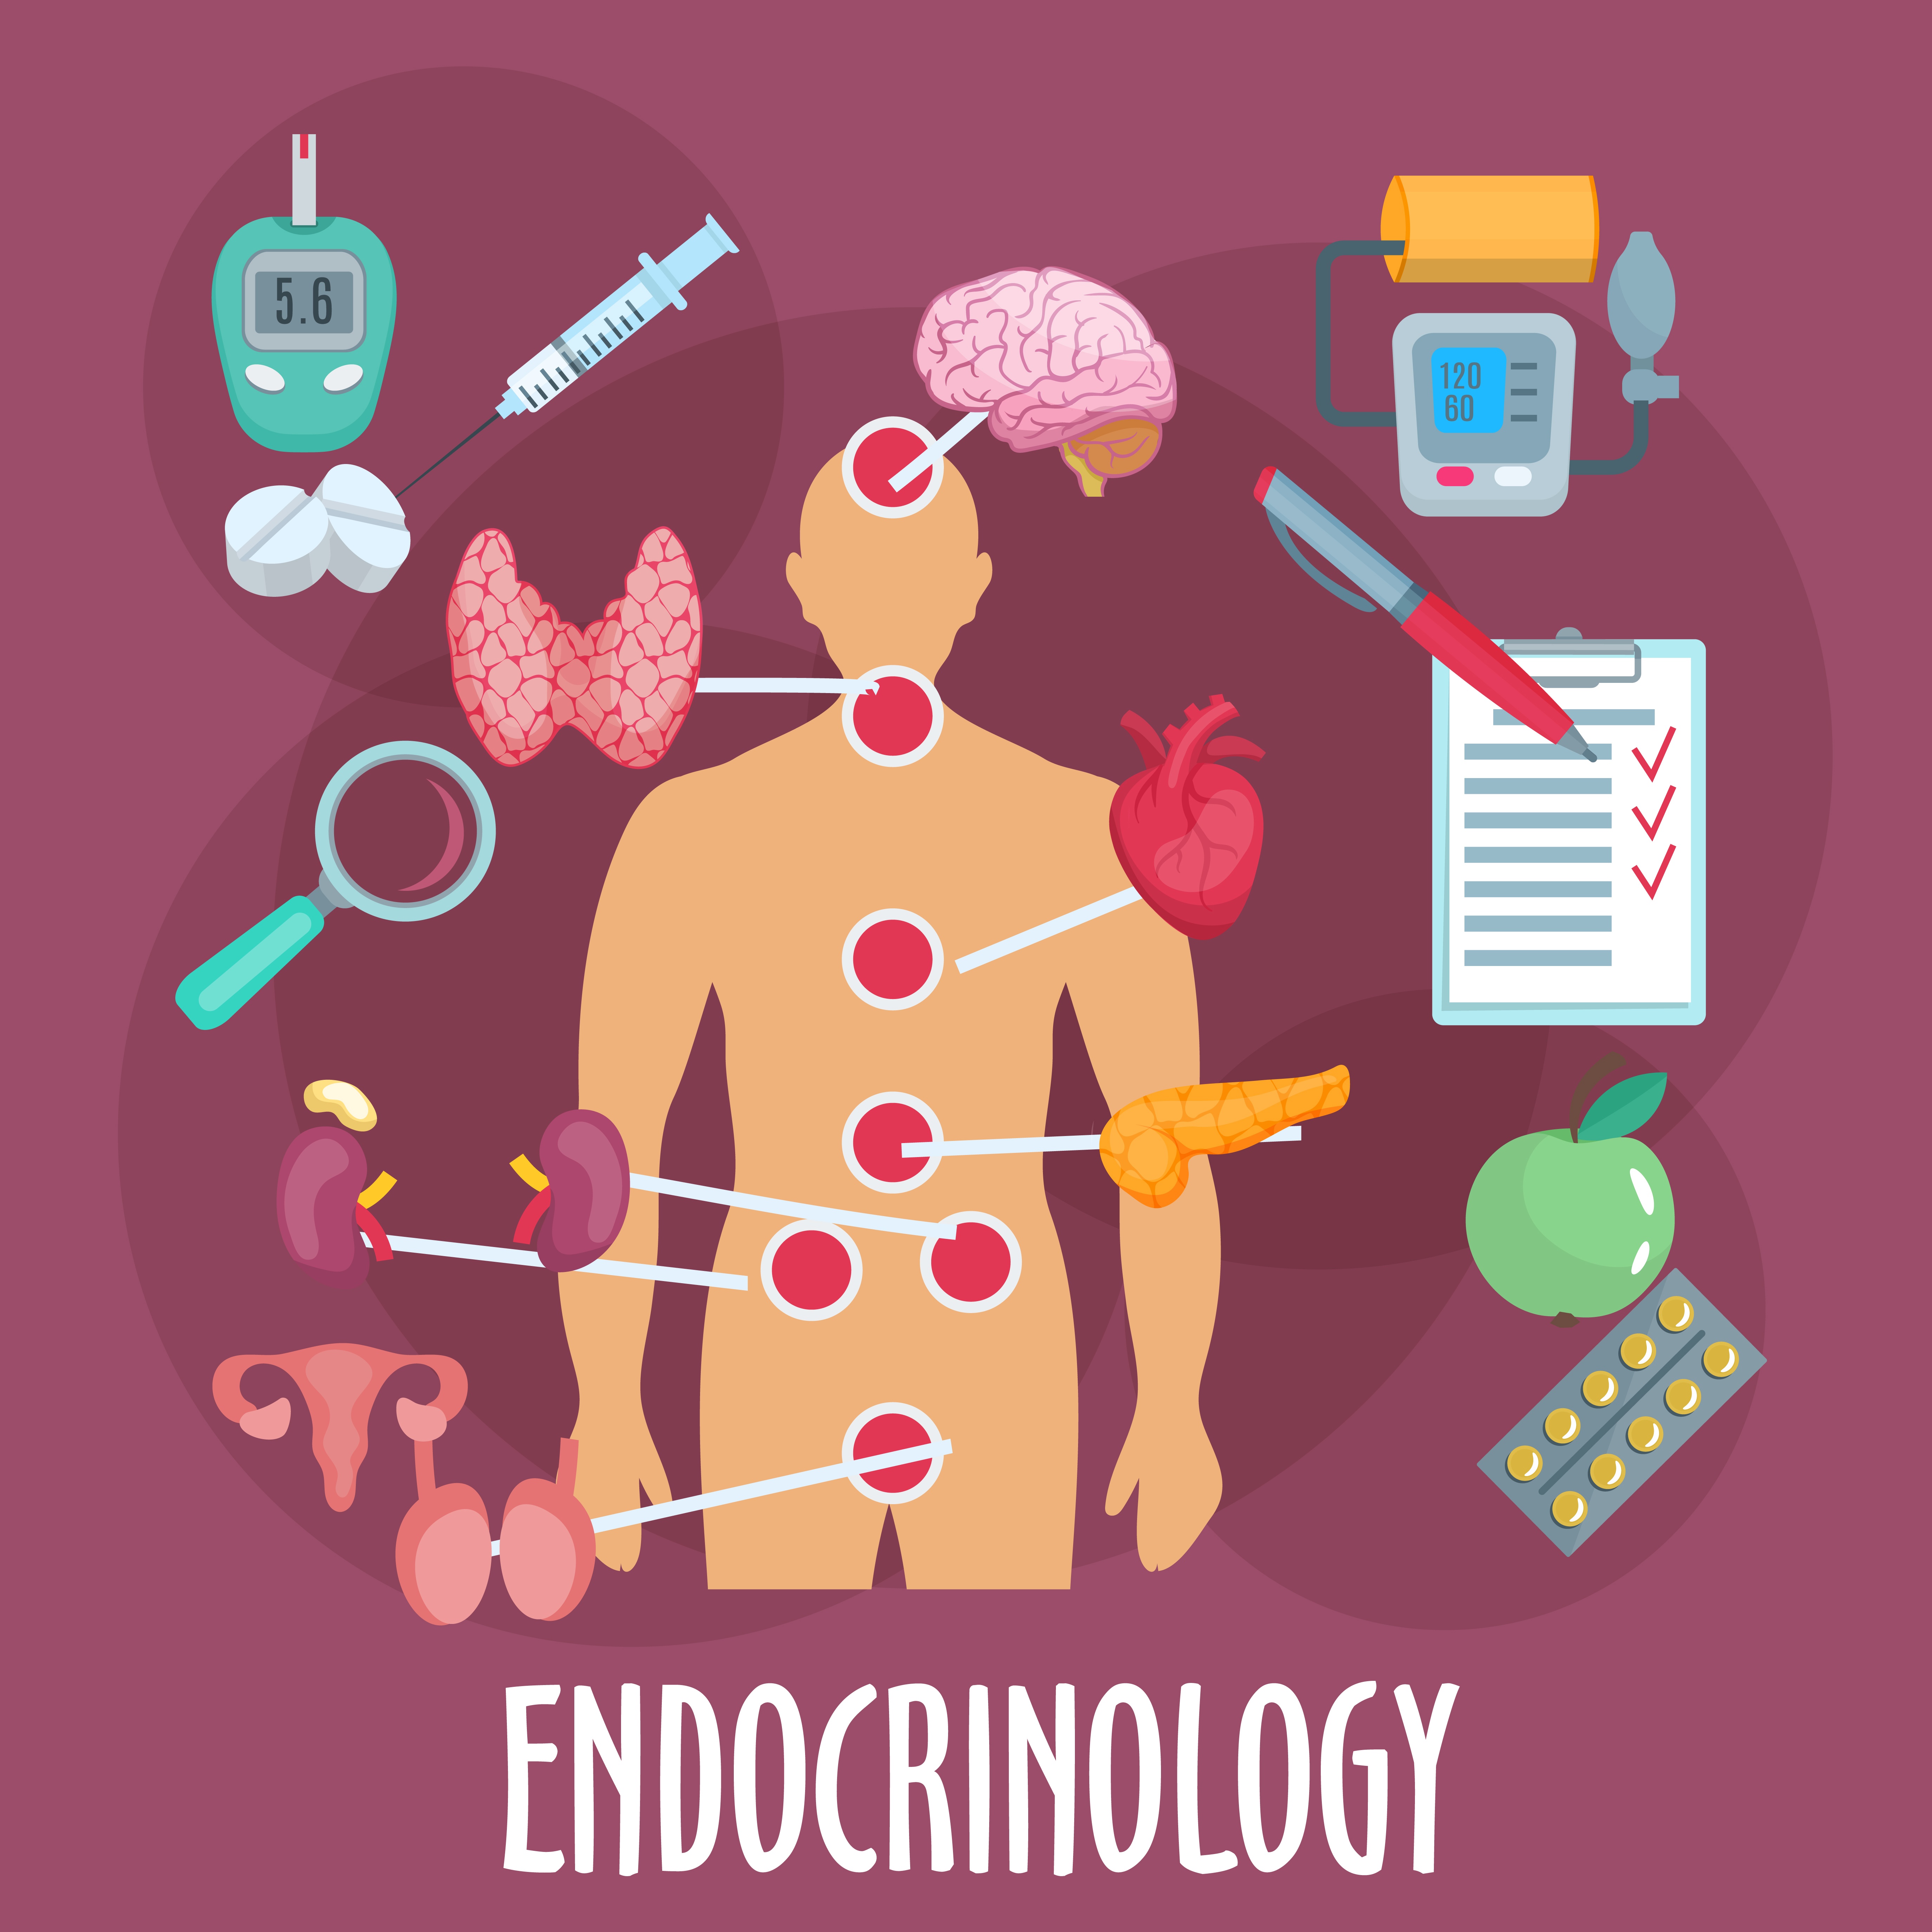 Endocrinology - a medical fieldwork overview